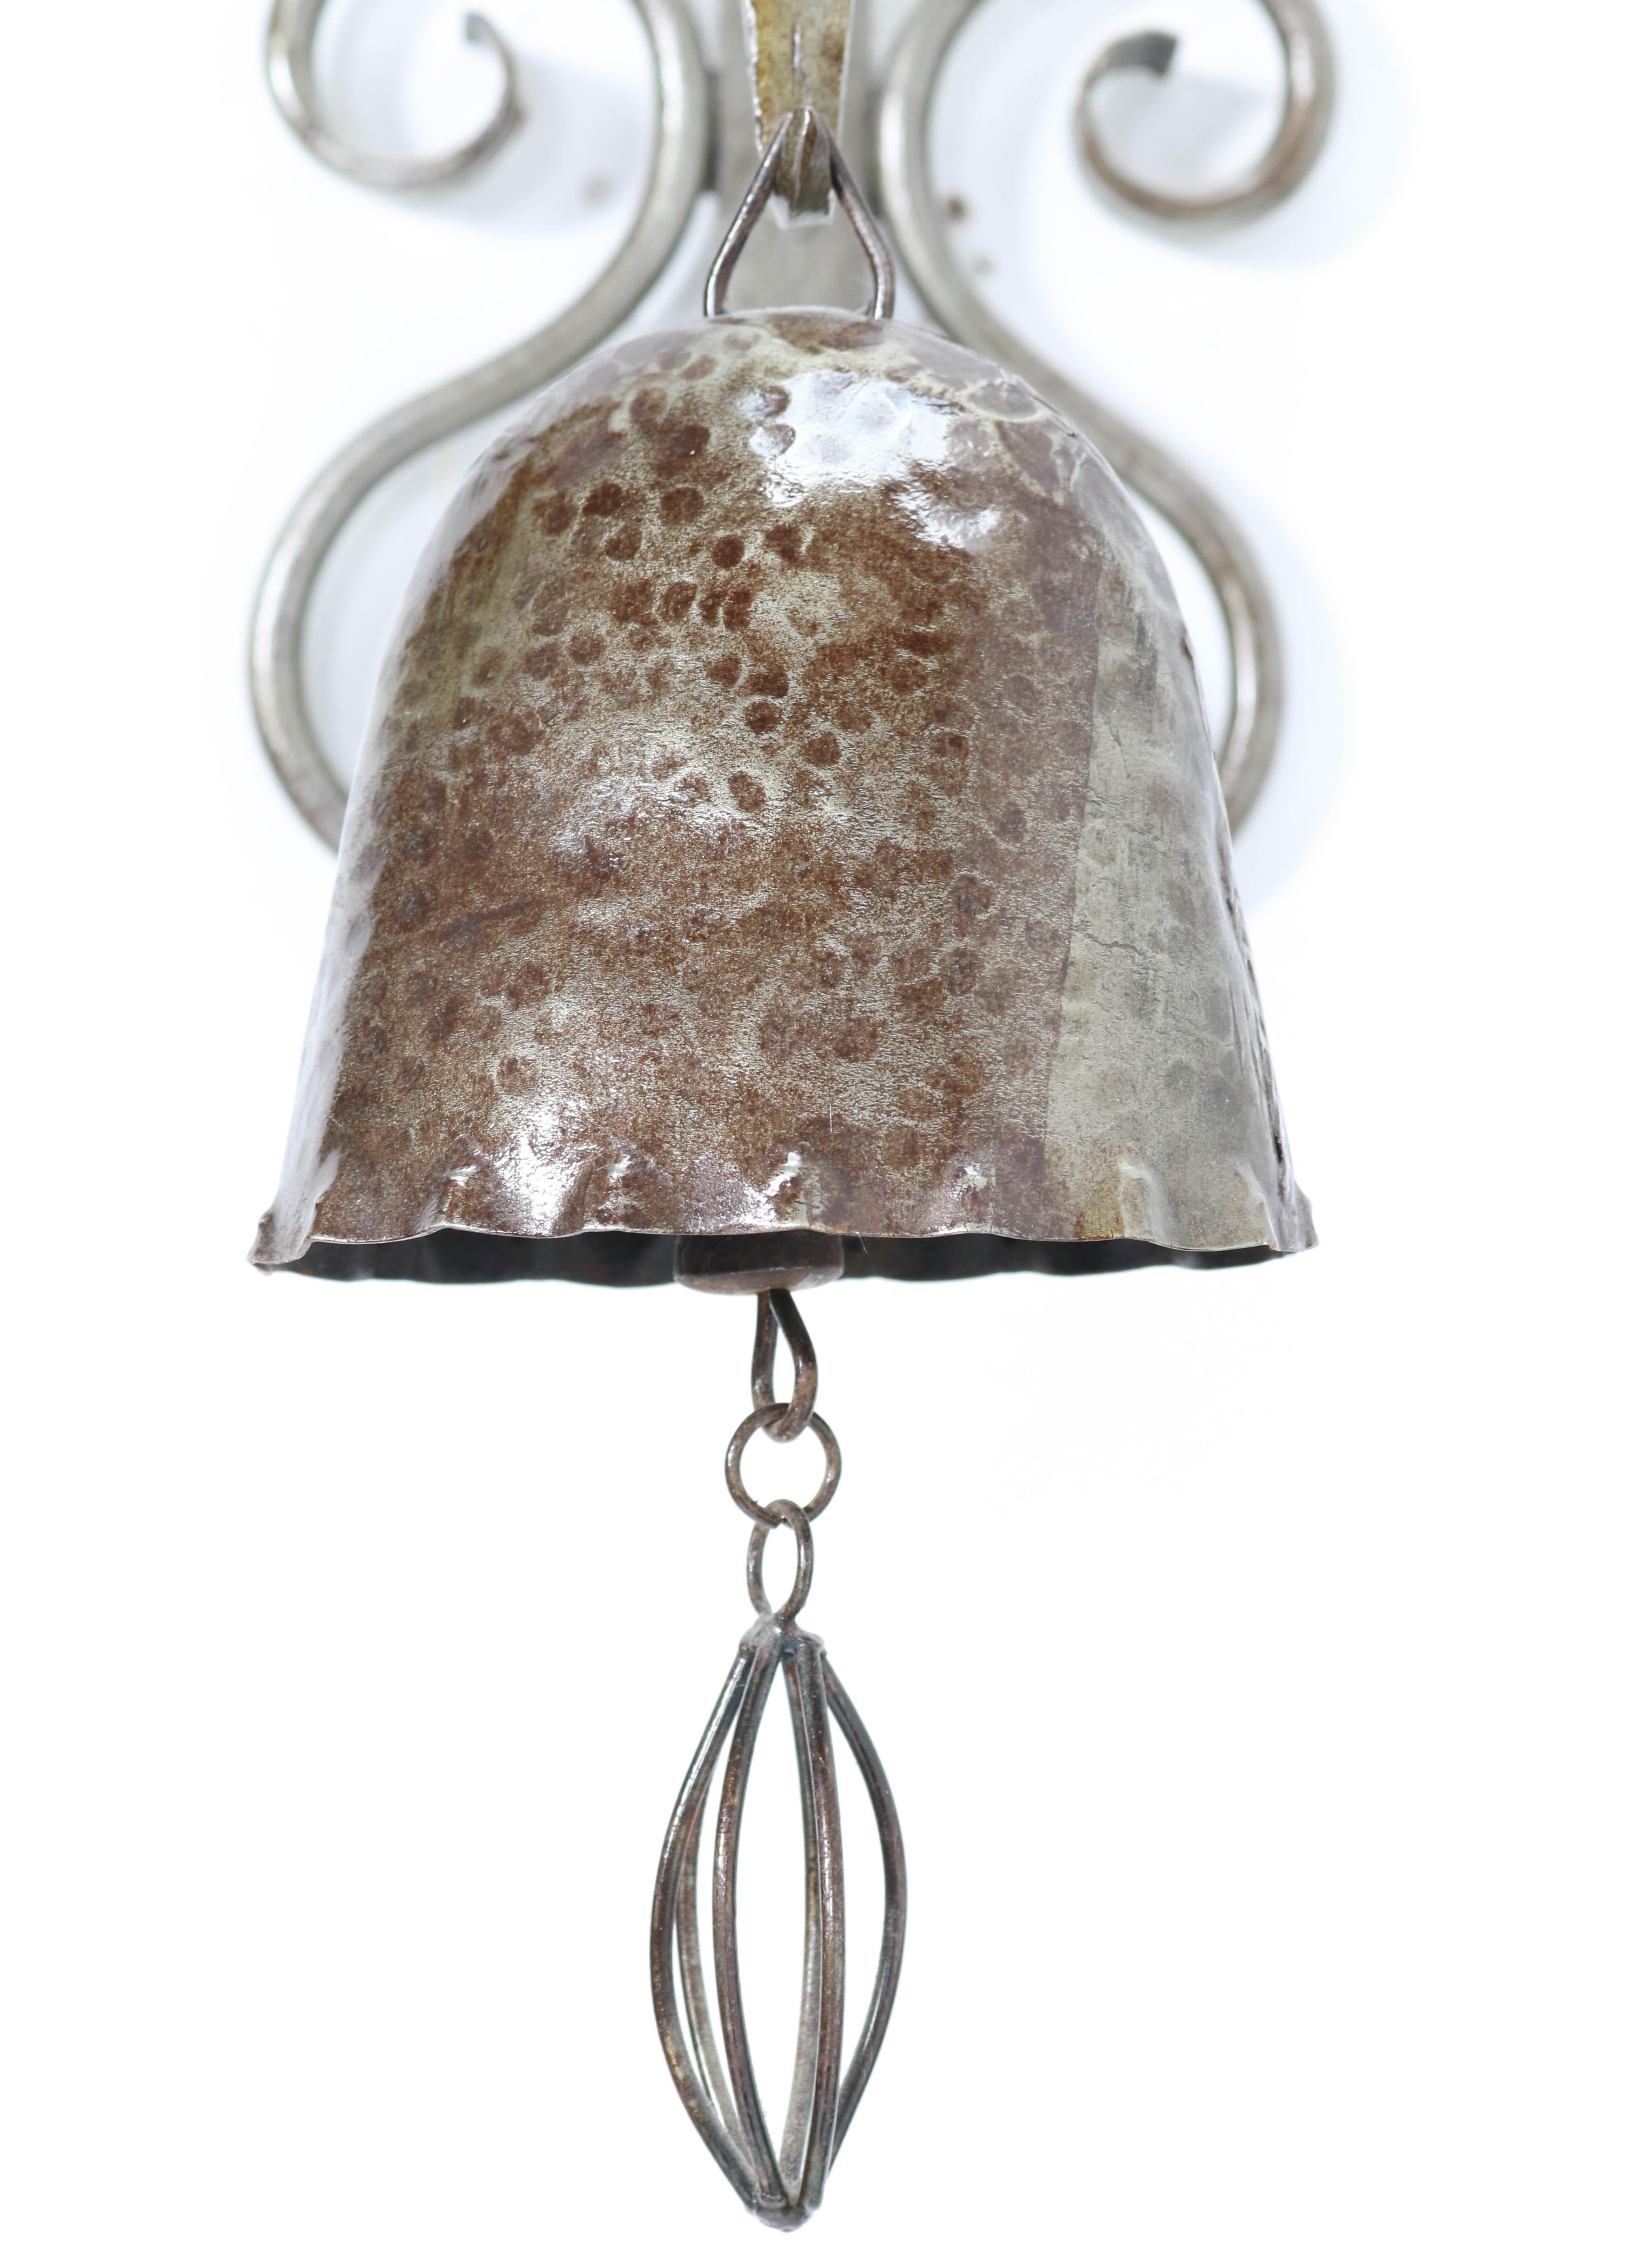 Patinated Wrought Iron Art Deco Amsterdam School Gong or Bell, 1930s For Sale 5